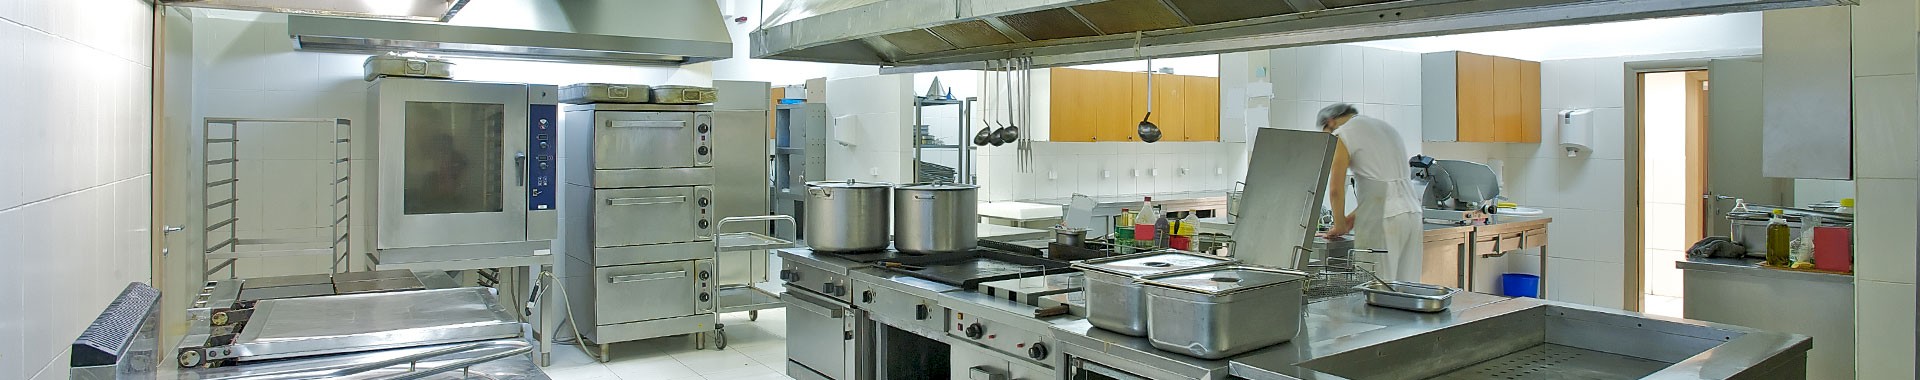 D&S Commercial Kitchen Products